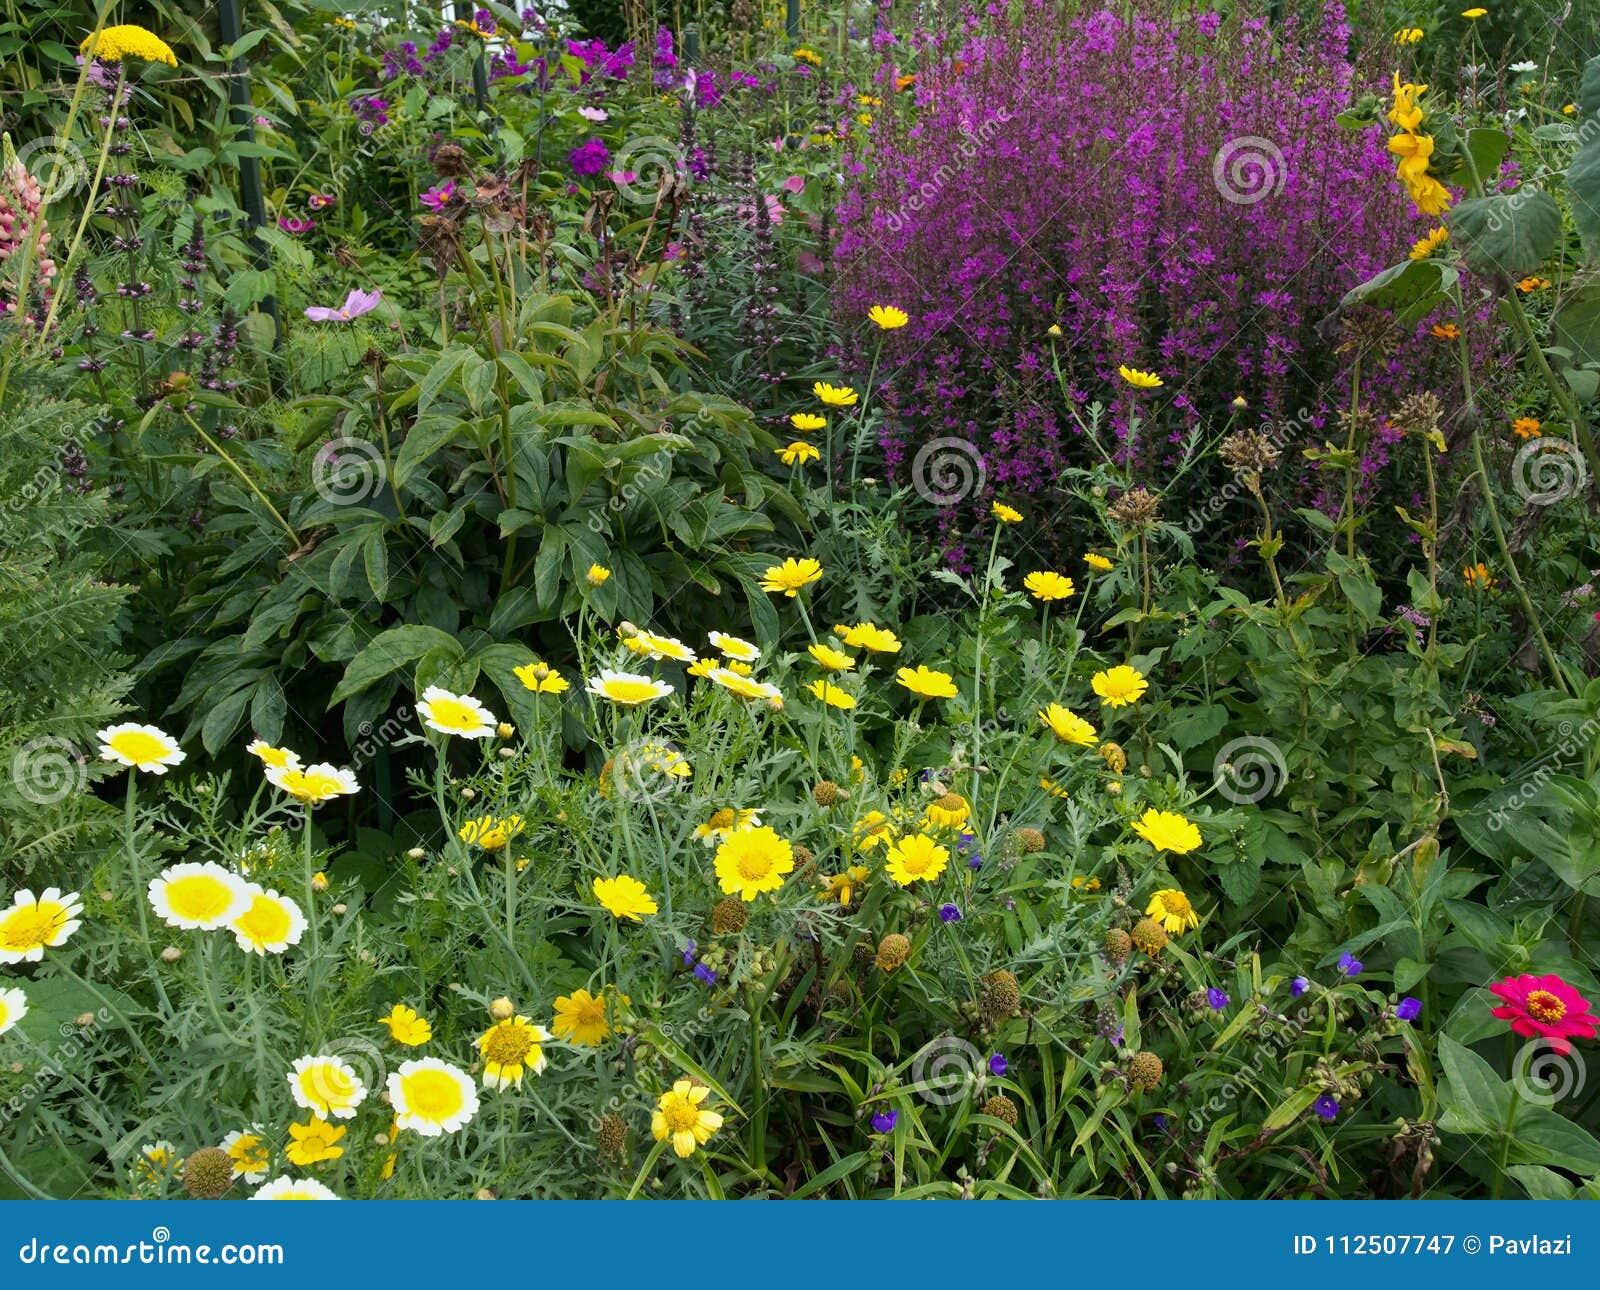 Flower Bed In The Country Garden Stock Image Image Of Rustic